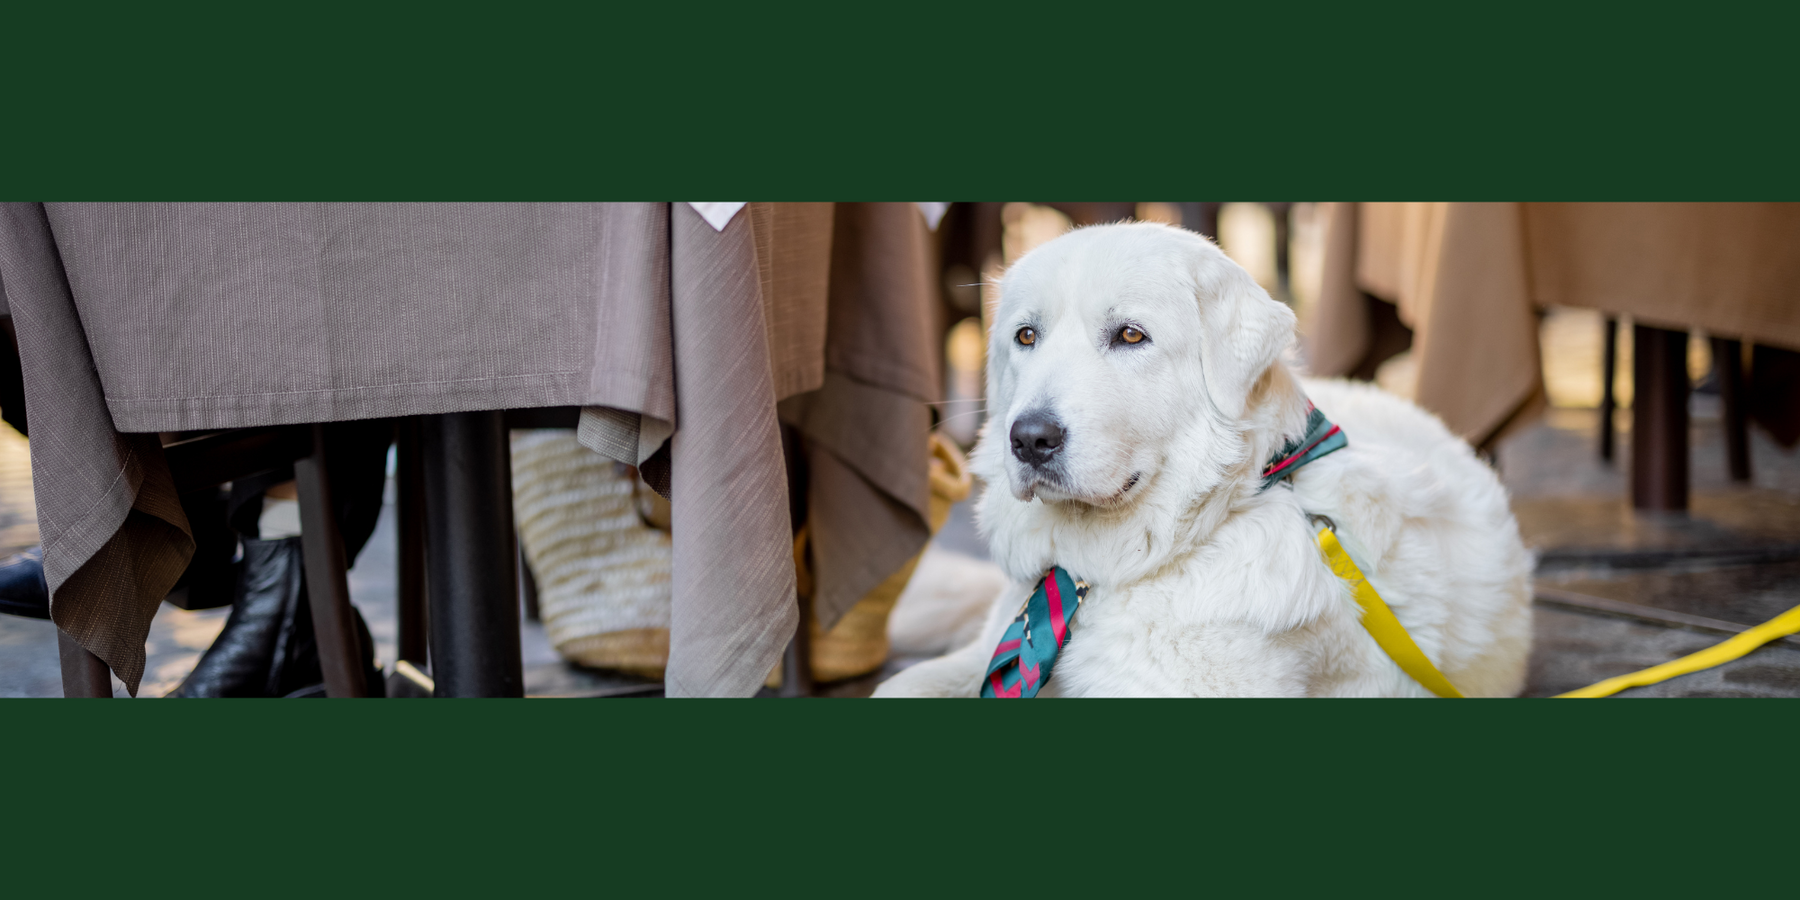 Is Your Restaurant Dog-friendly?